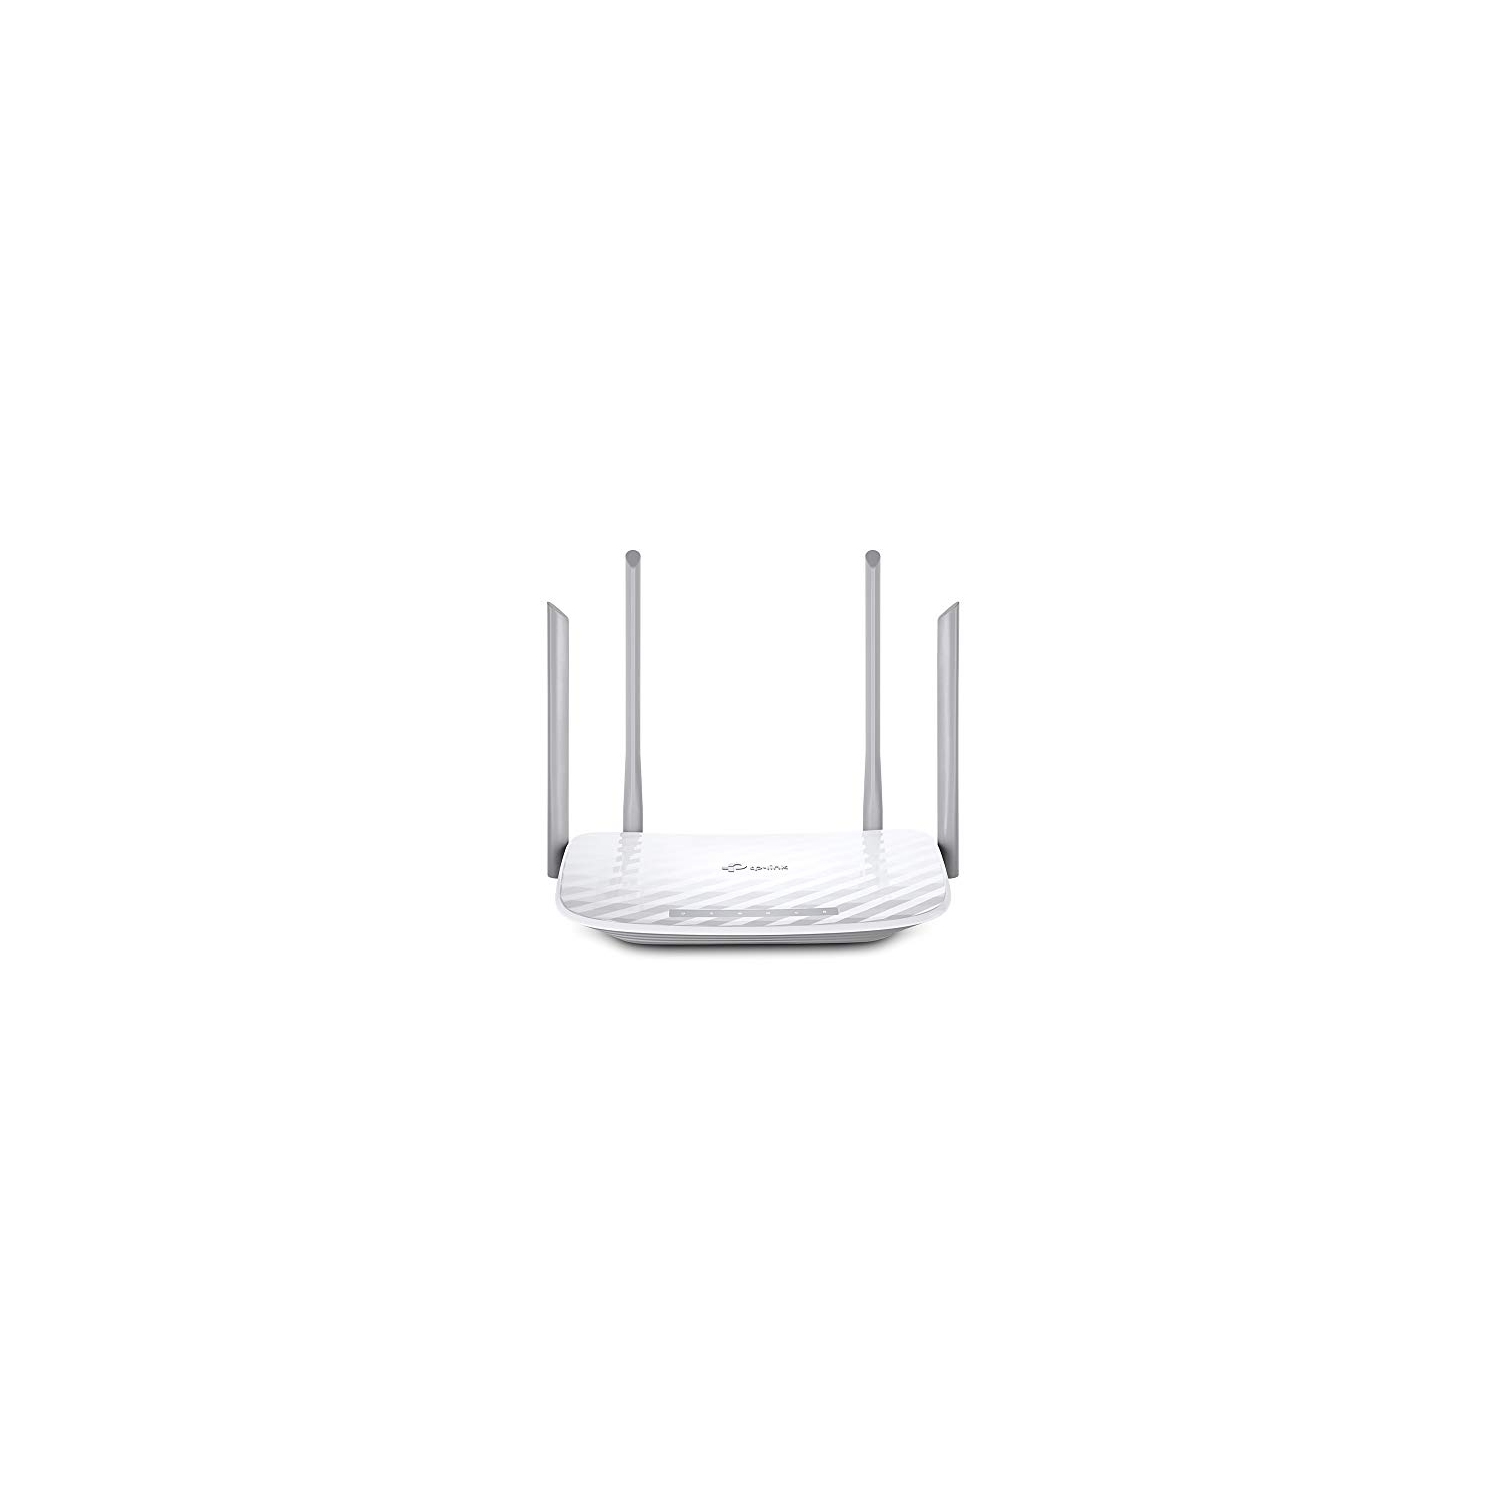 TP-Link Archer C50 AC1200 Dual Band Wireless Wi-Fi Router w/4 External Antennas